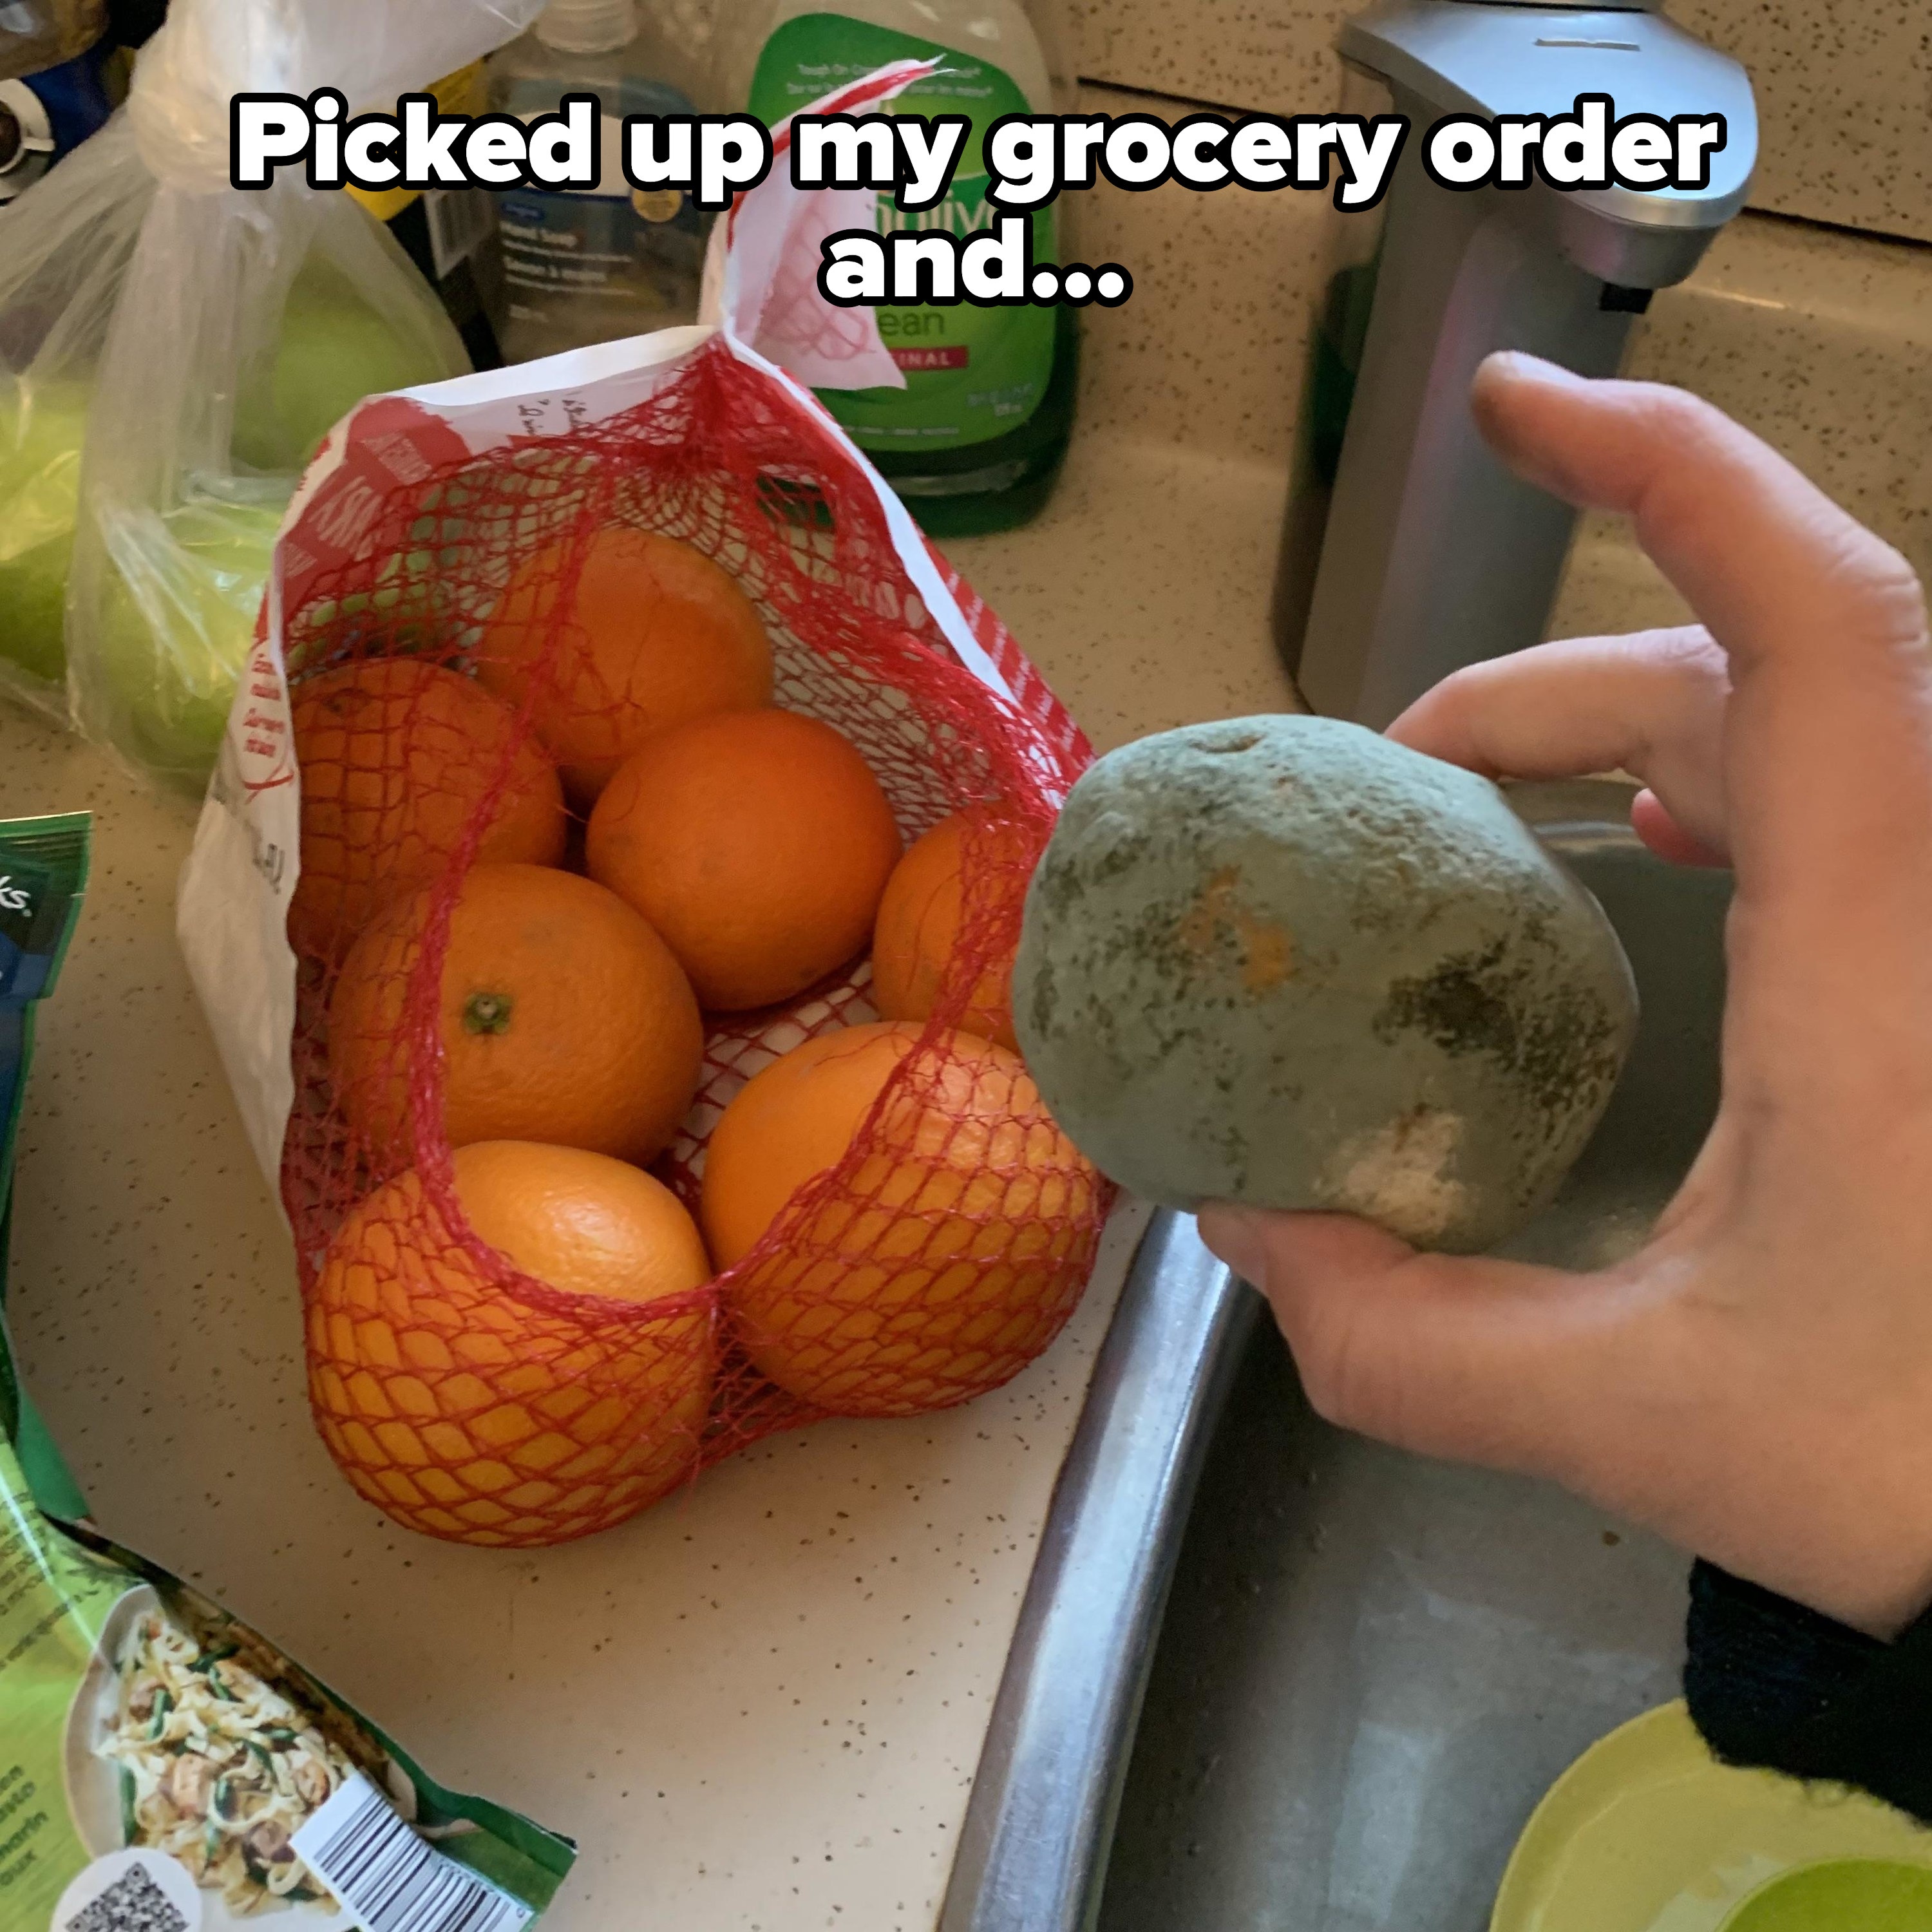 An orange in a bag covered in green mold